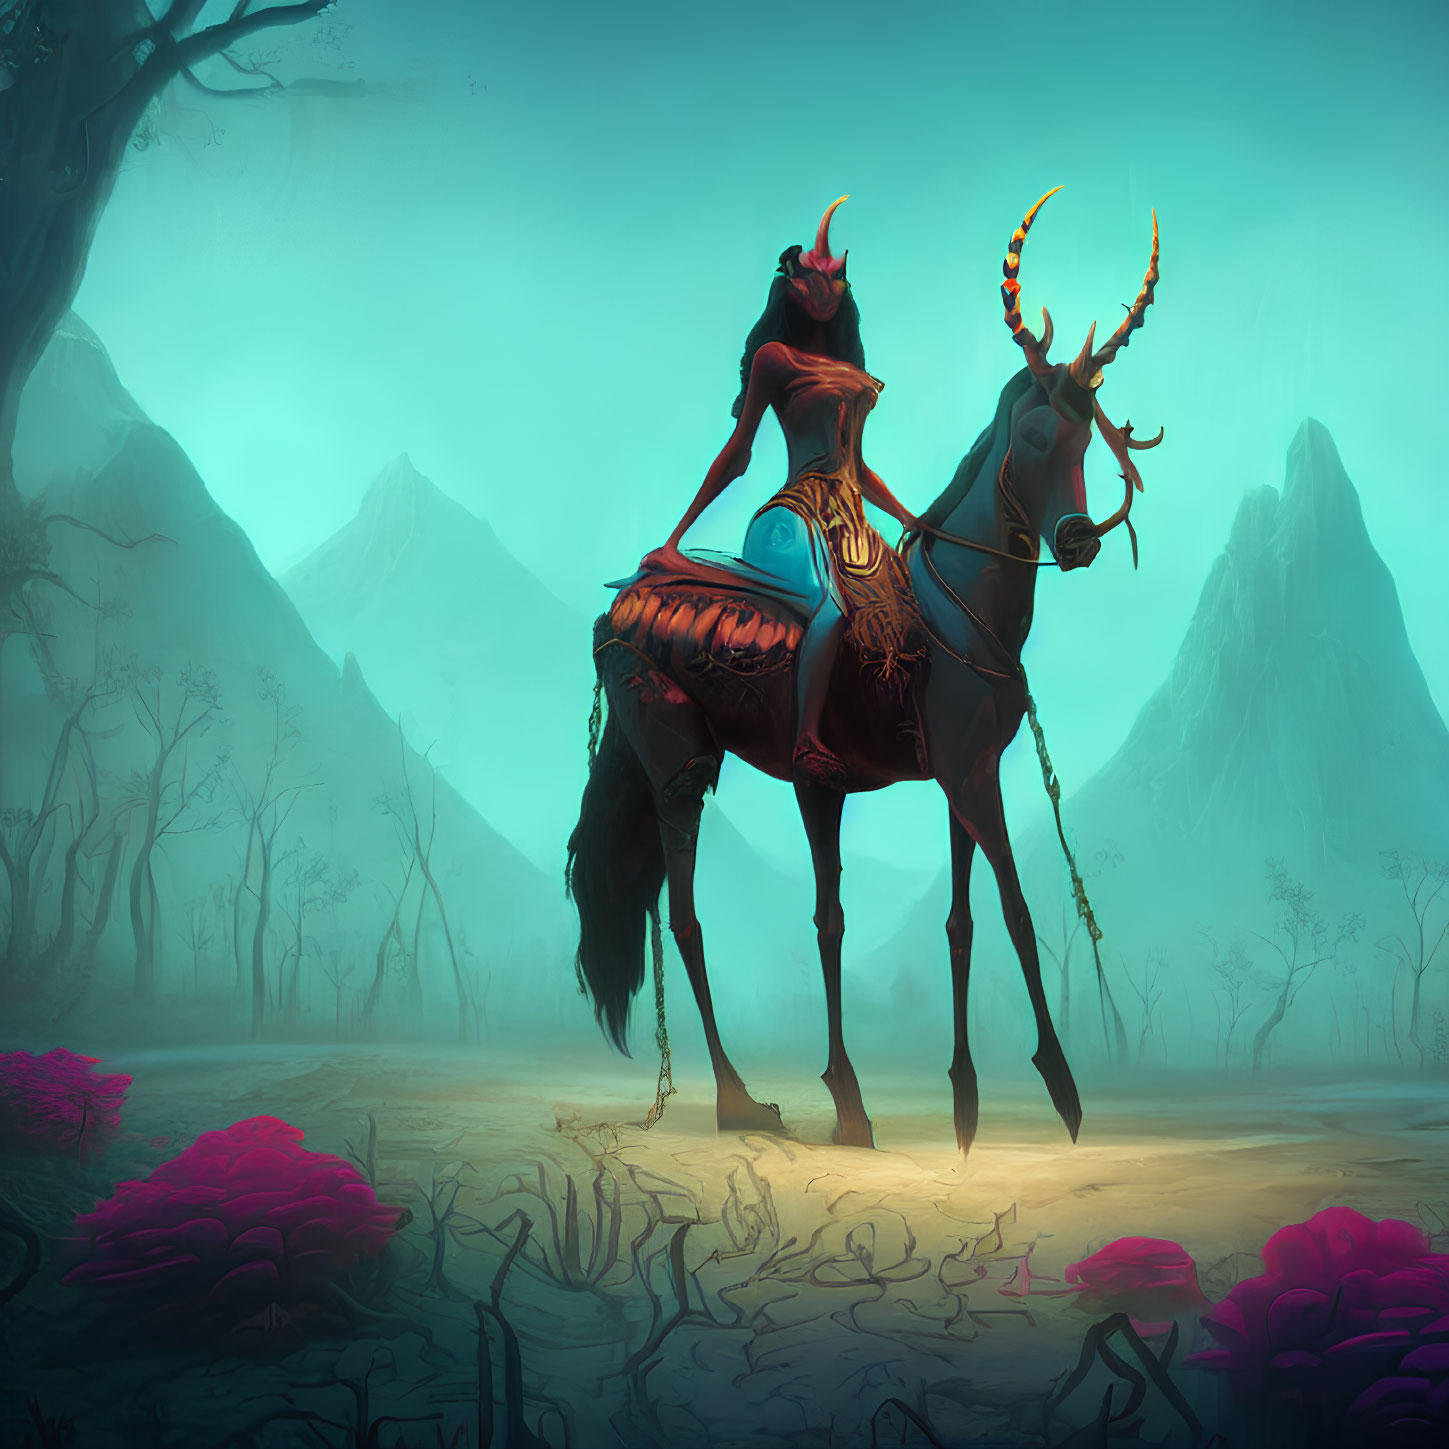 Mystical figure in red cloak on ghostly horse in eerie forest